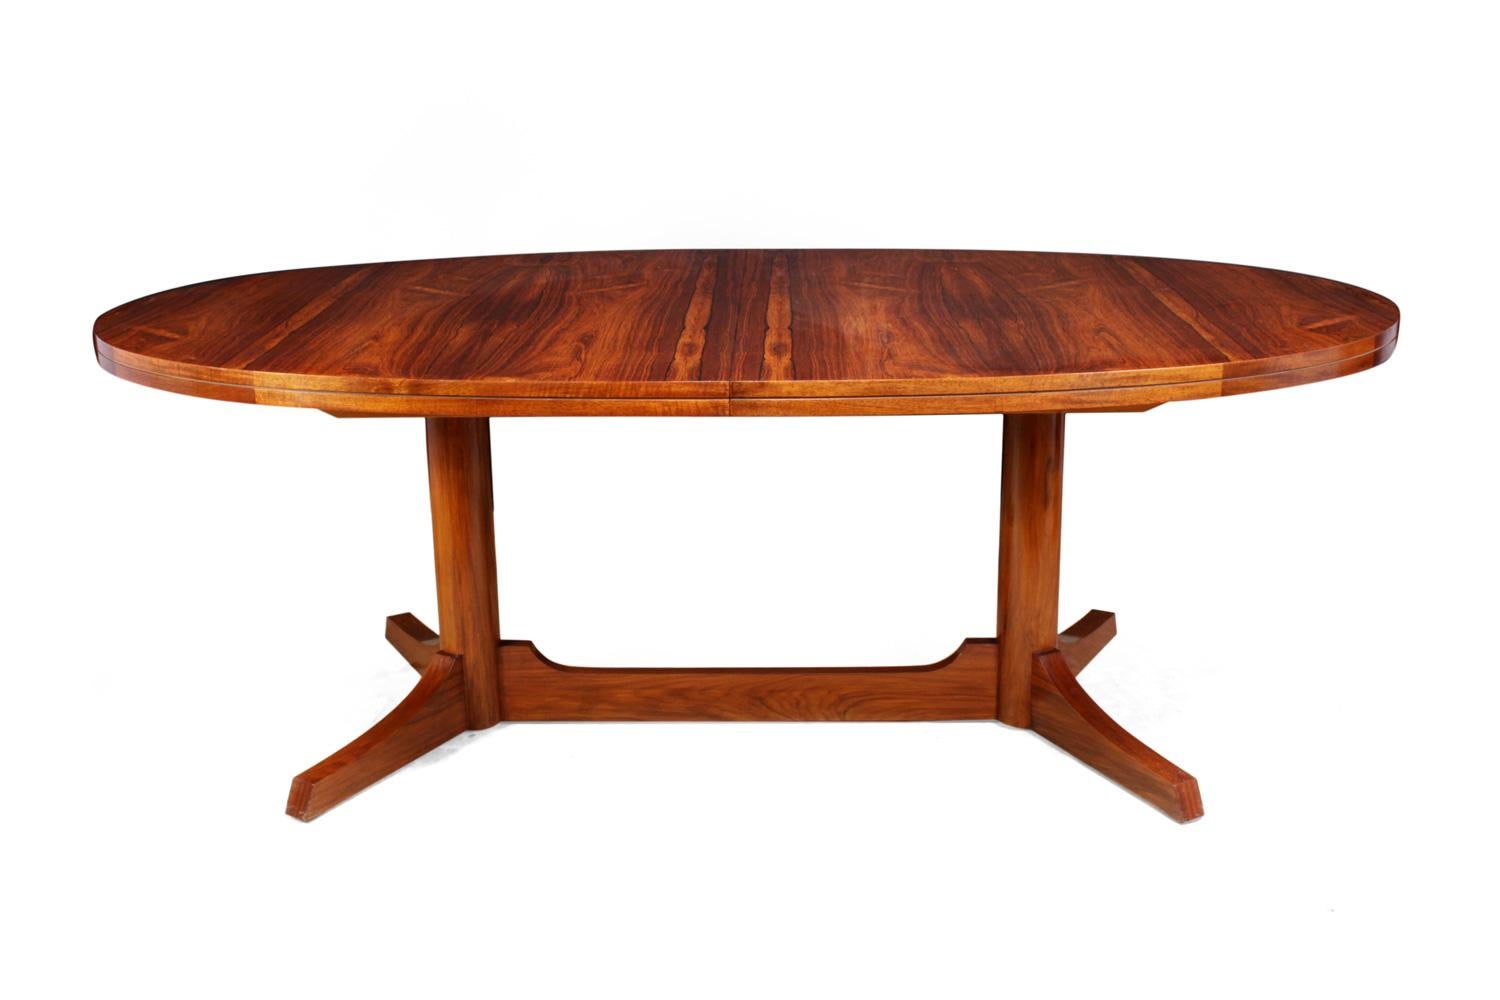 Midcentury dining table by Robert Heritage
Designed by Robert Heritage and produced by Archie Shine in the late 1950s this dining table will seat 8-10 people comfortably with the extra leaf in place, the table has been fully hand polished and is in